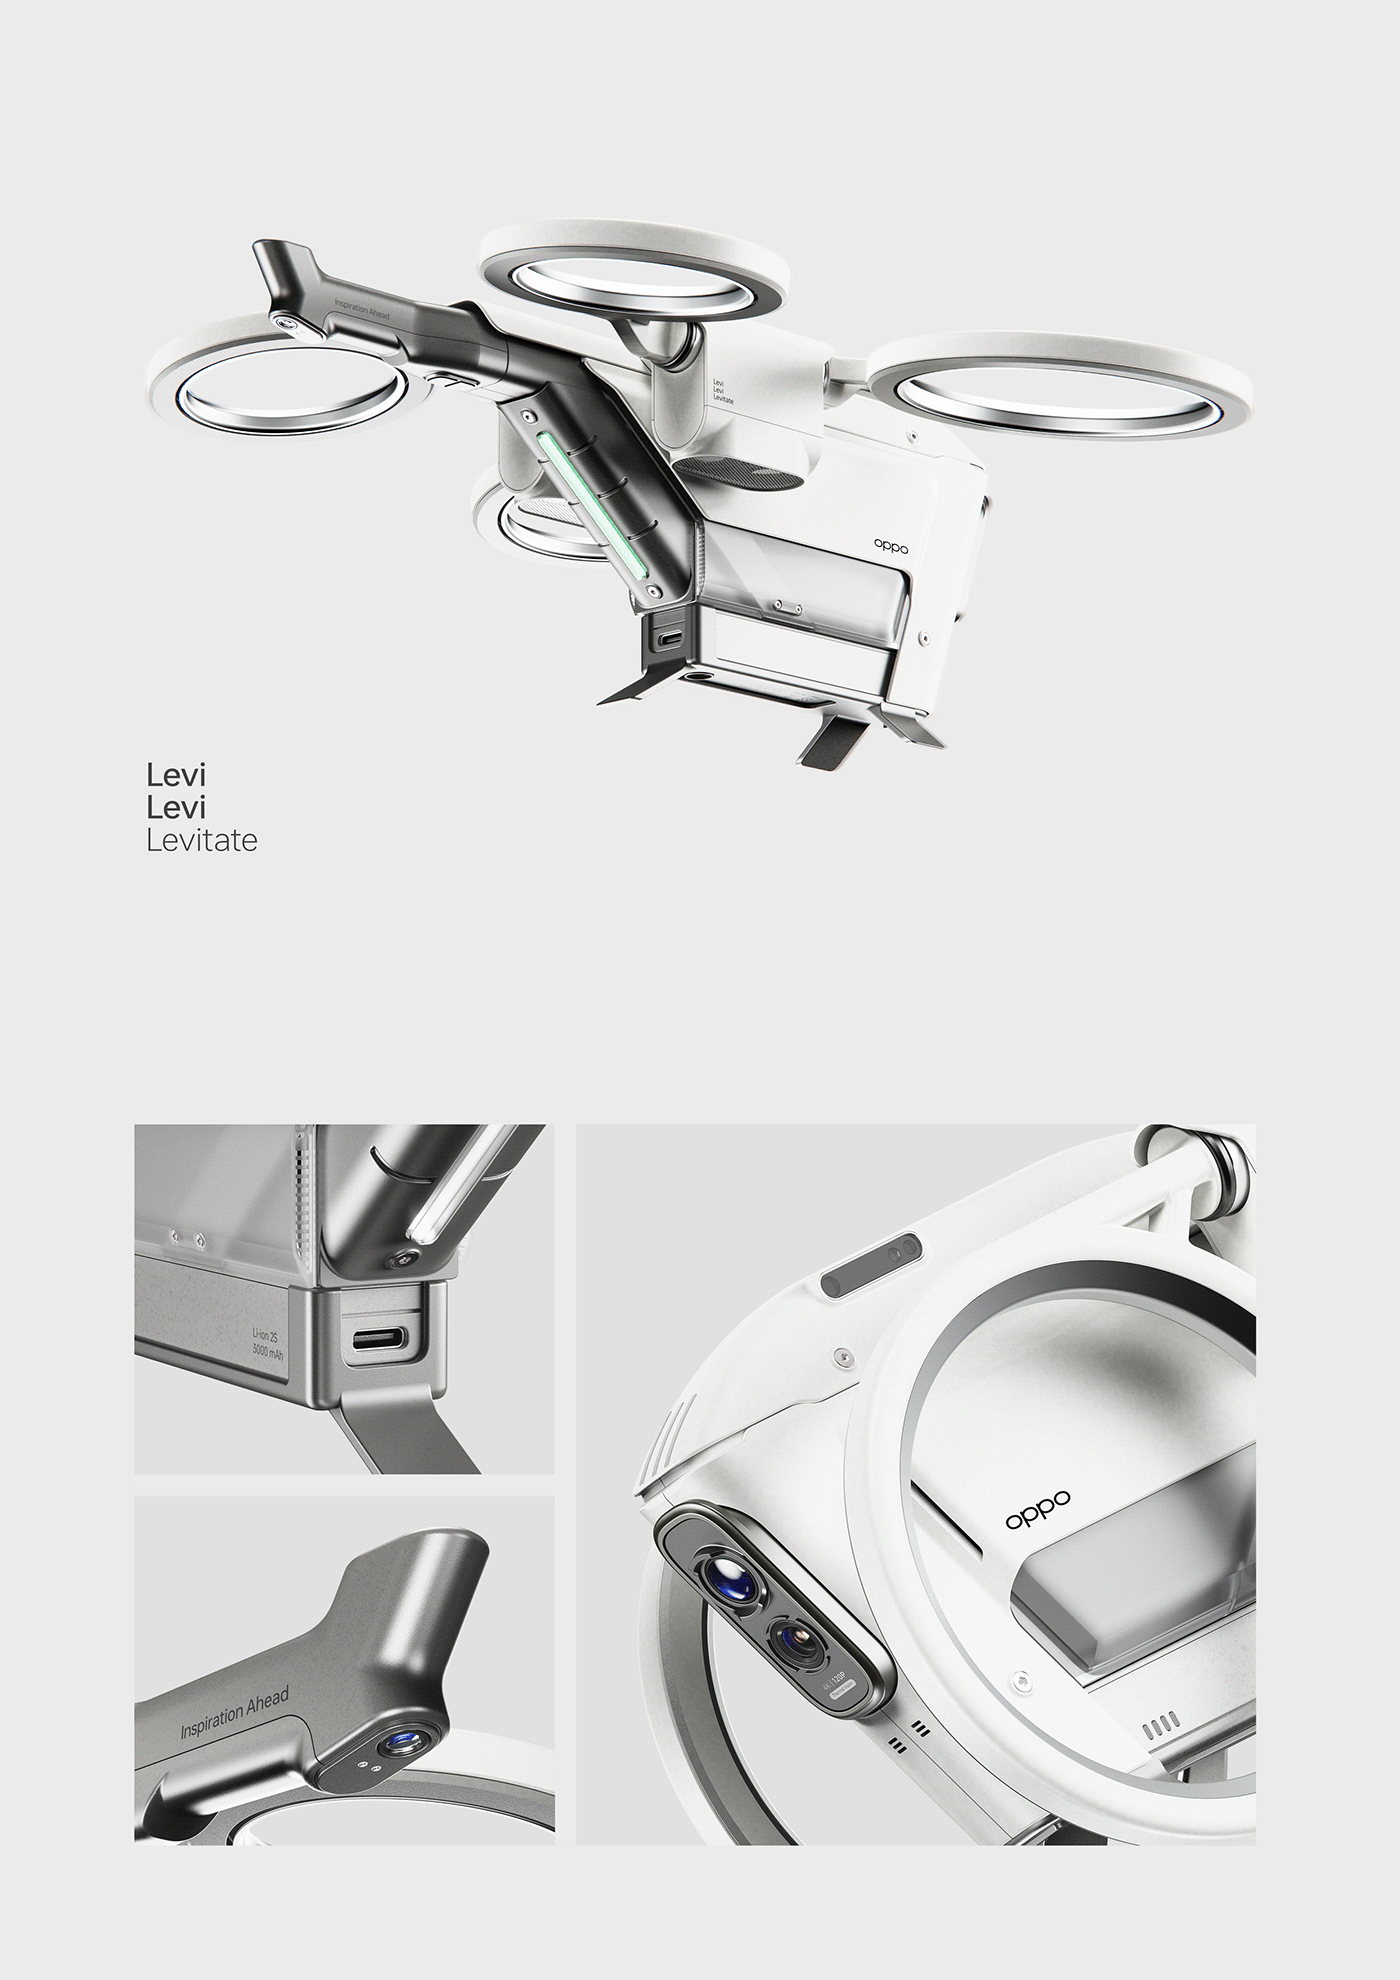 industrial design  product design  drone Oppo robot Engineering  vision